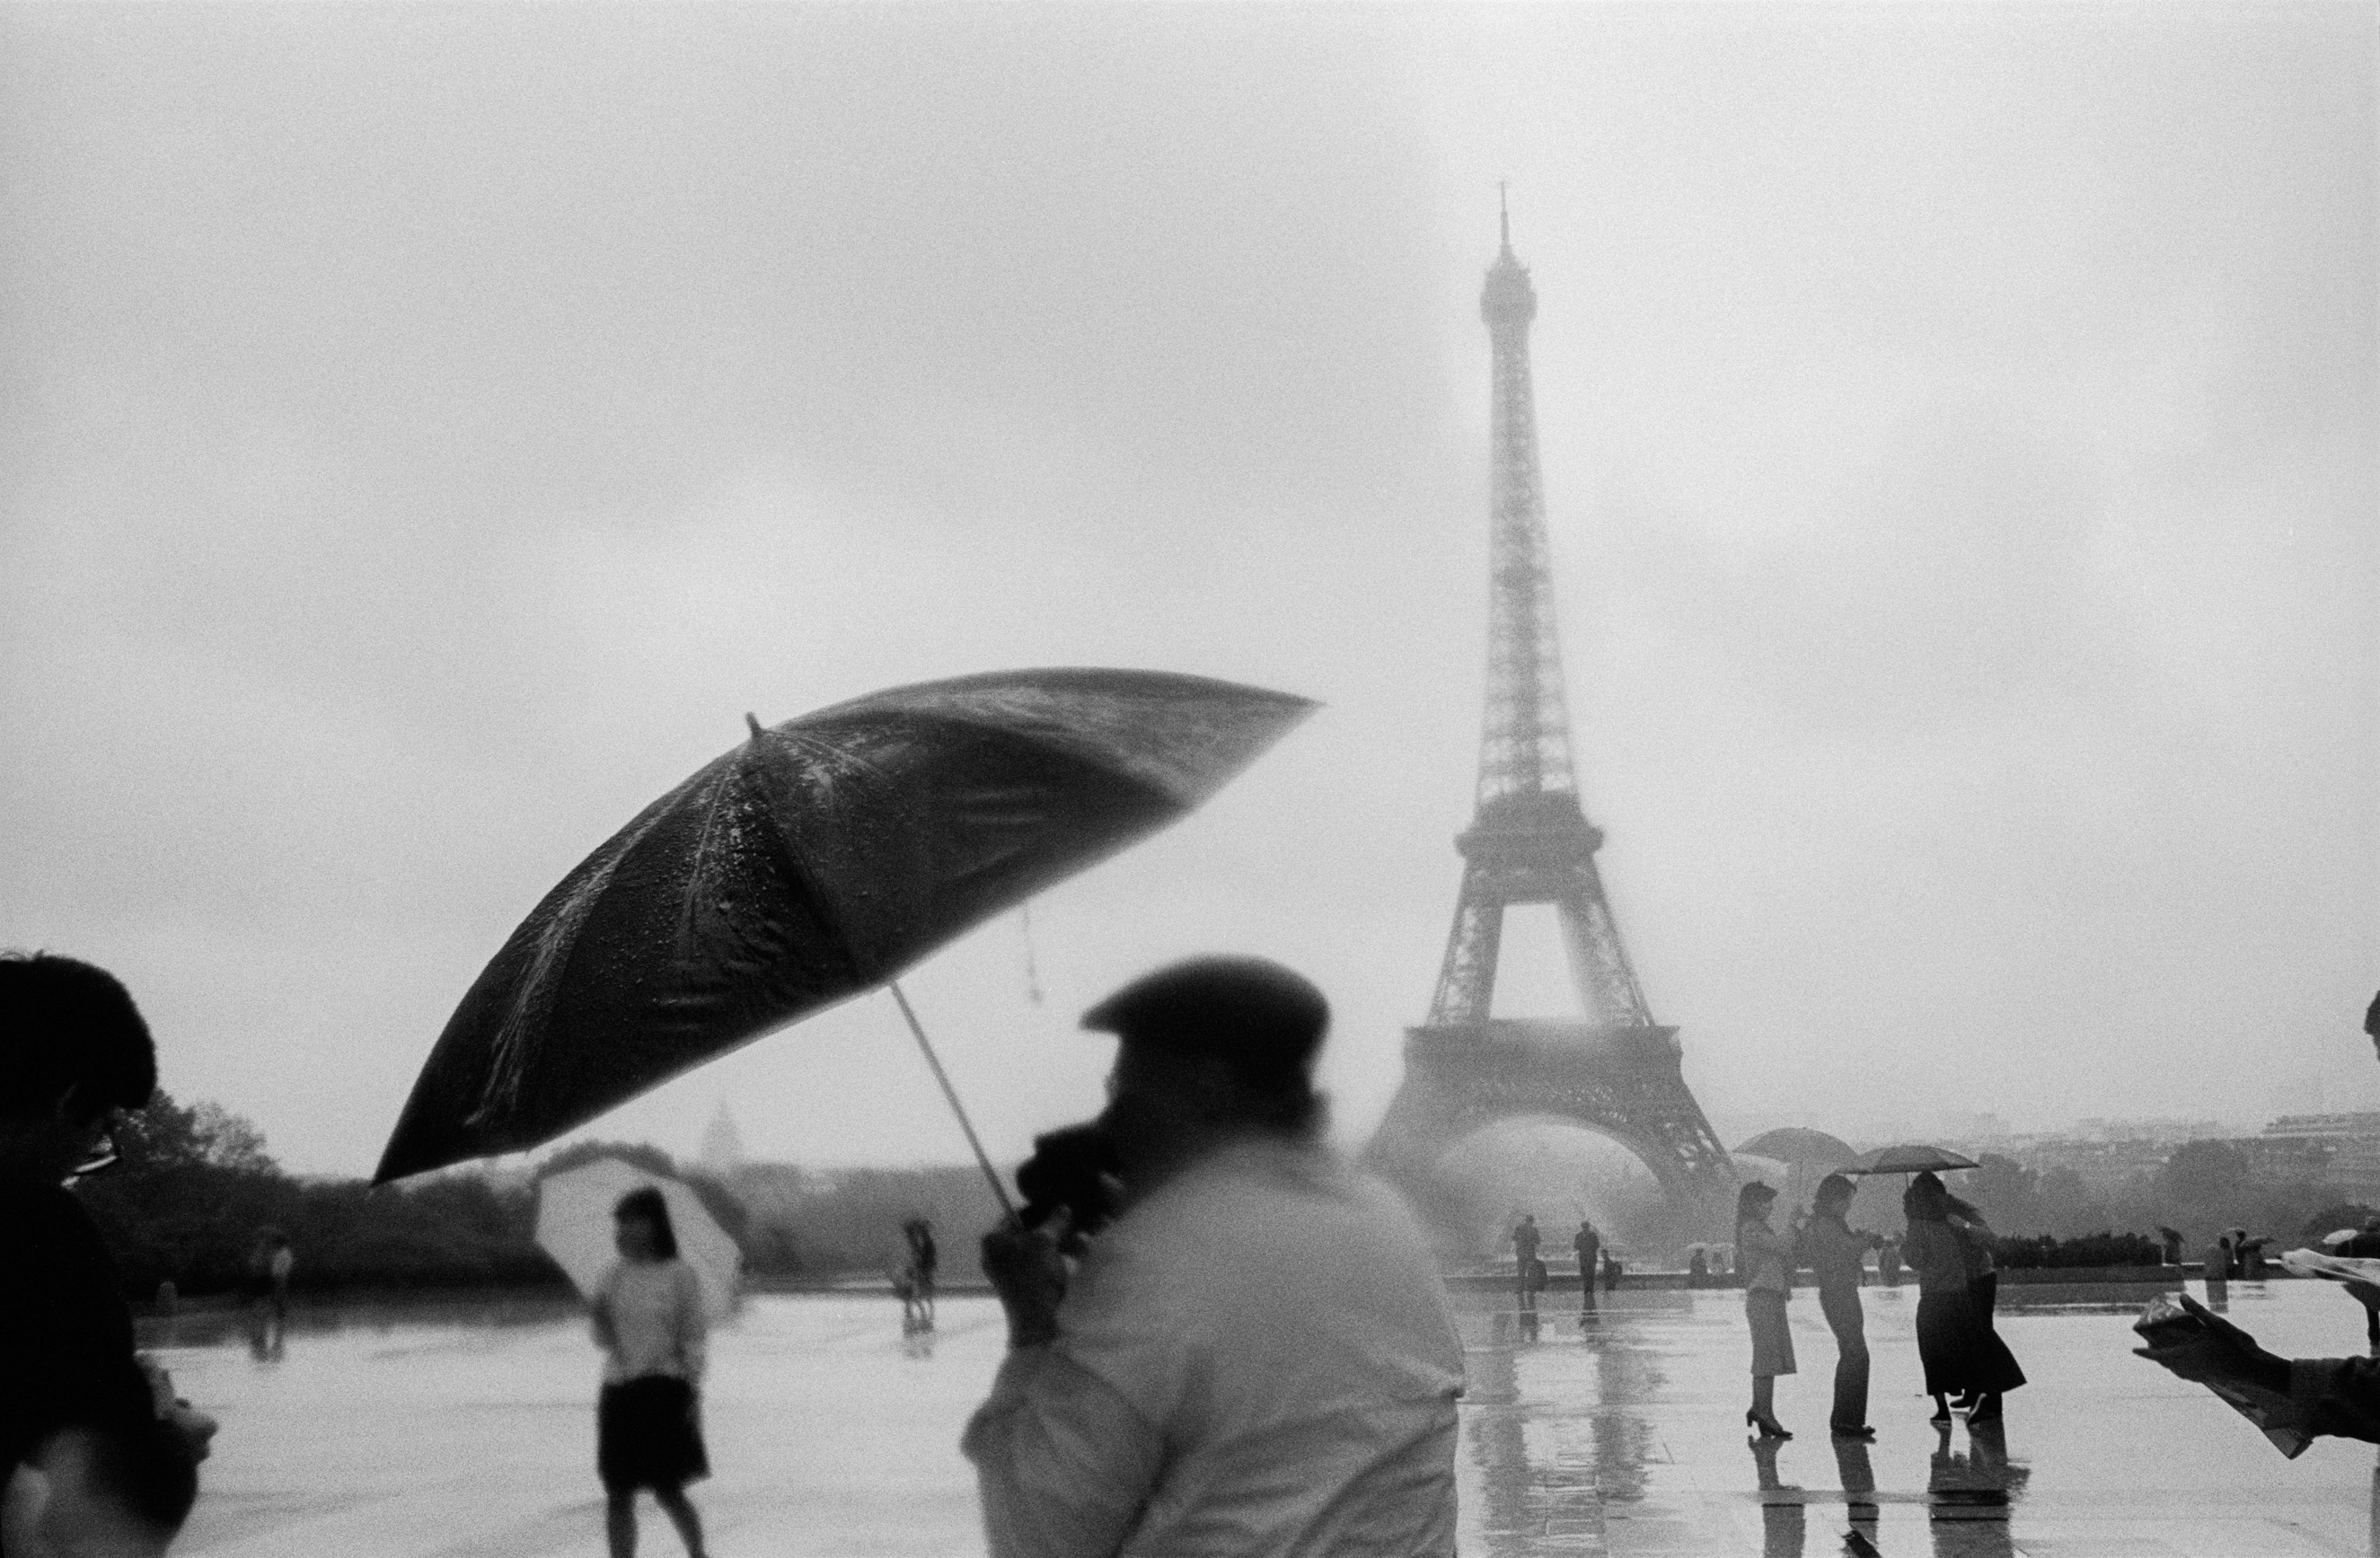 The Eiffel Tower viewed from the Place du Trocadéro in Paris in 1984.